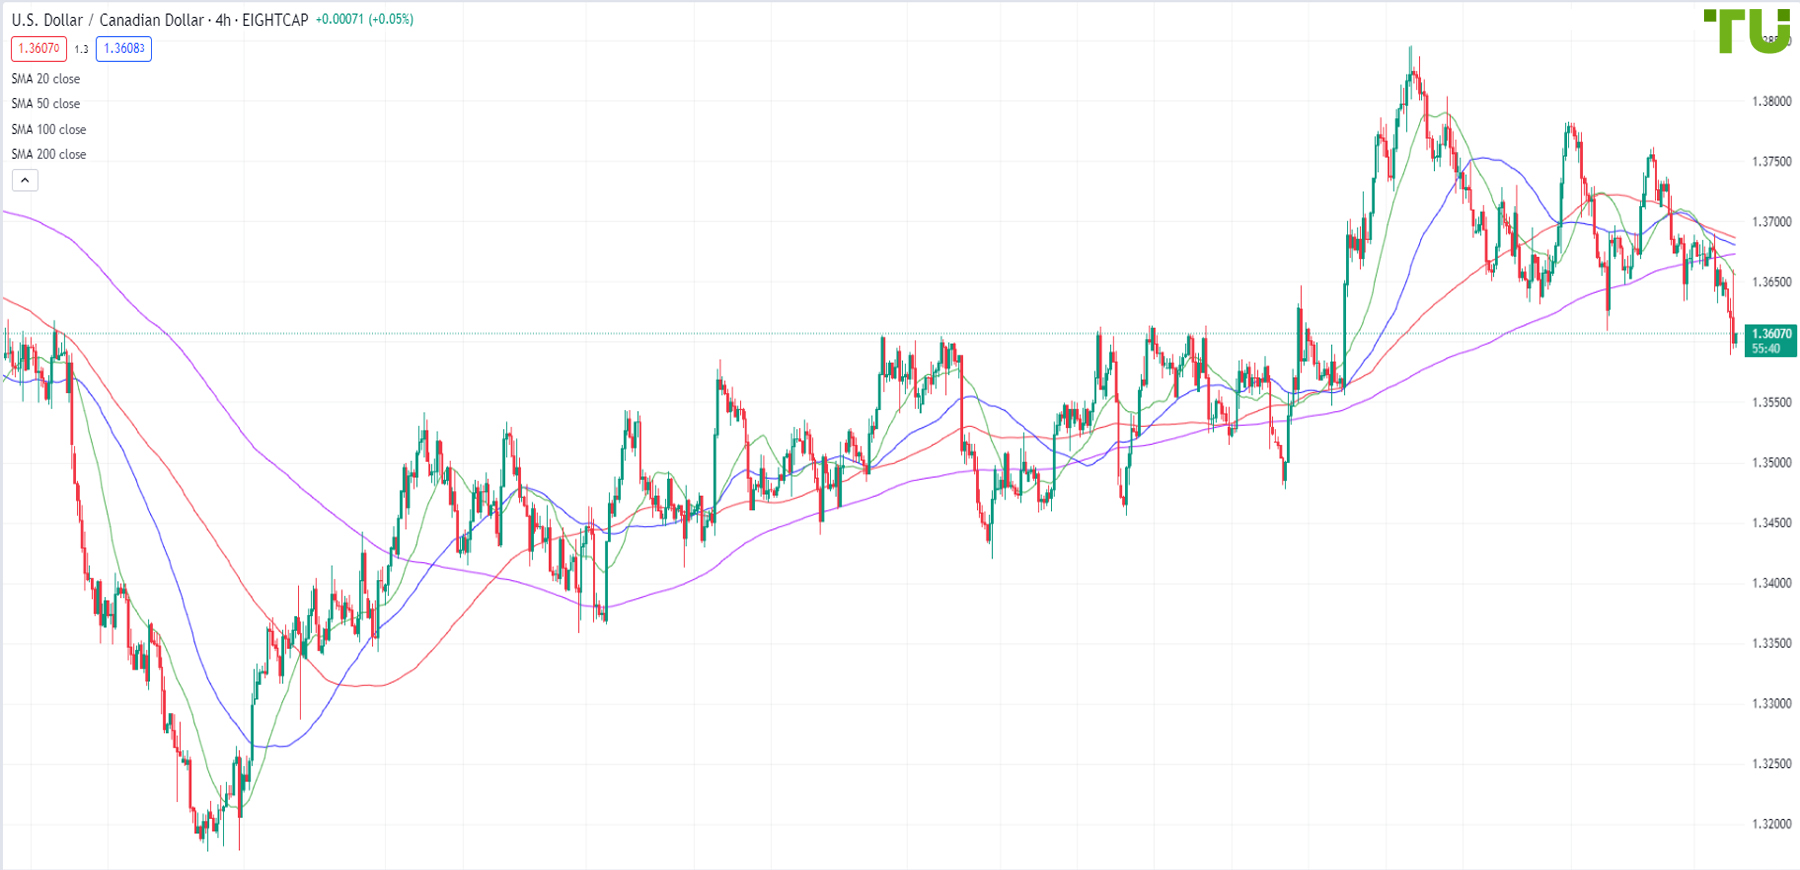 USD/CAD continues to decline